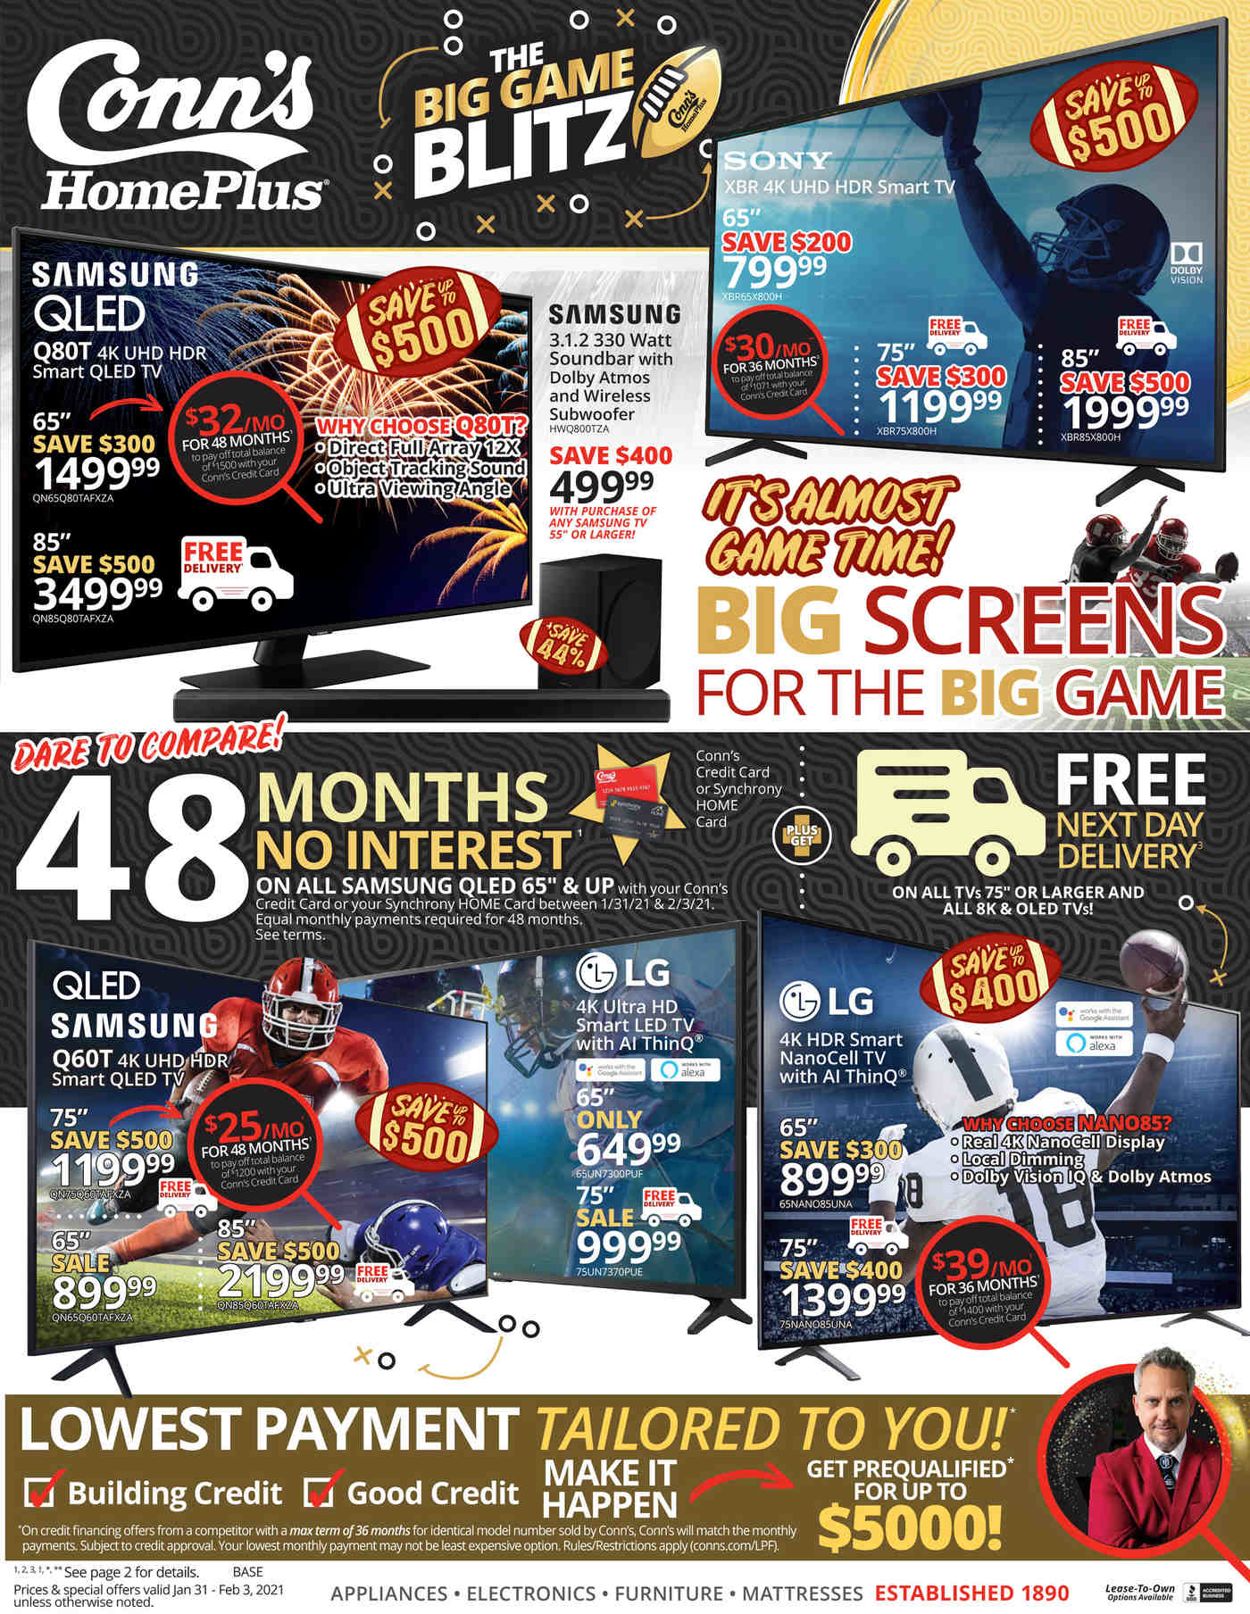 Conn's Home Plus Low Prices on Furniture and More 2021 Weekly Ad Circular - valid 01/31-02/03/2021